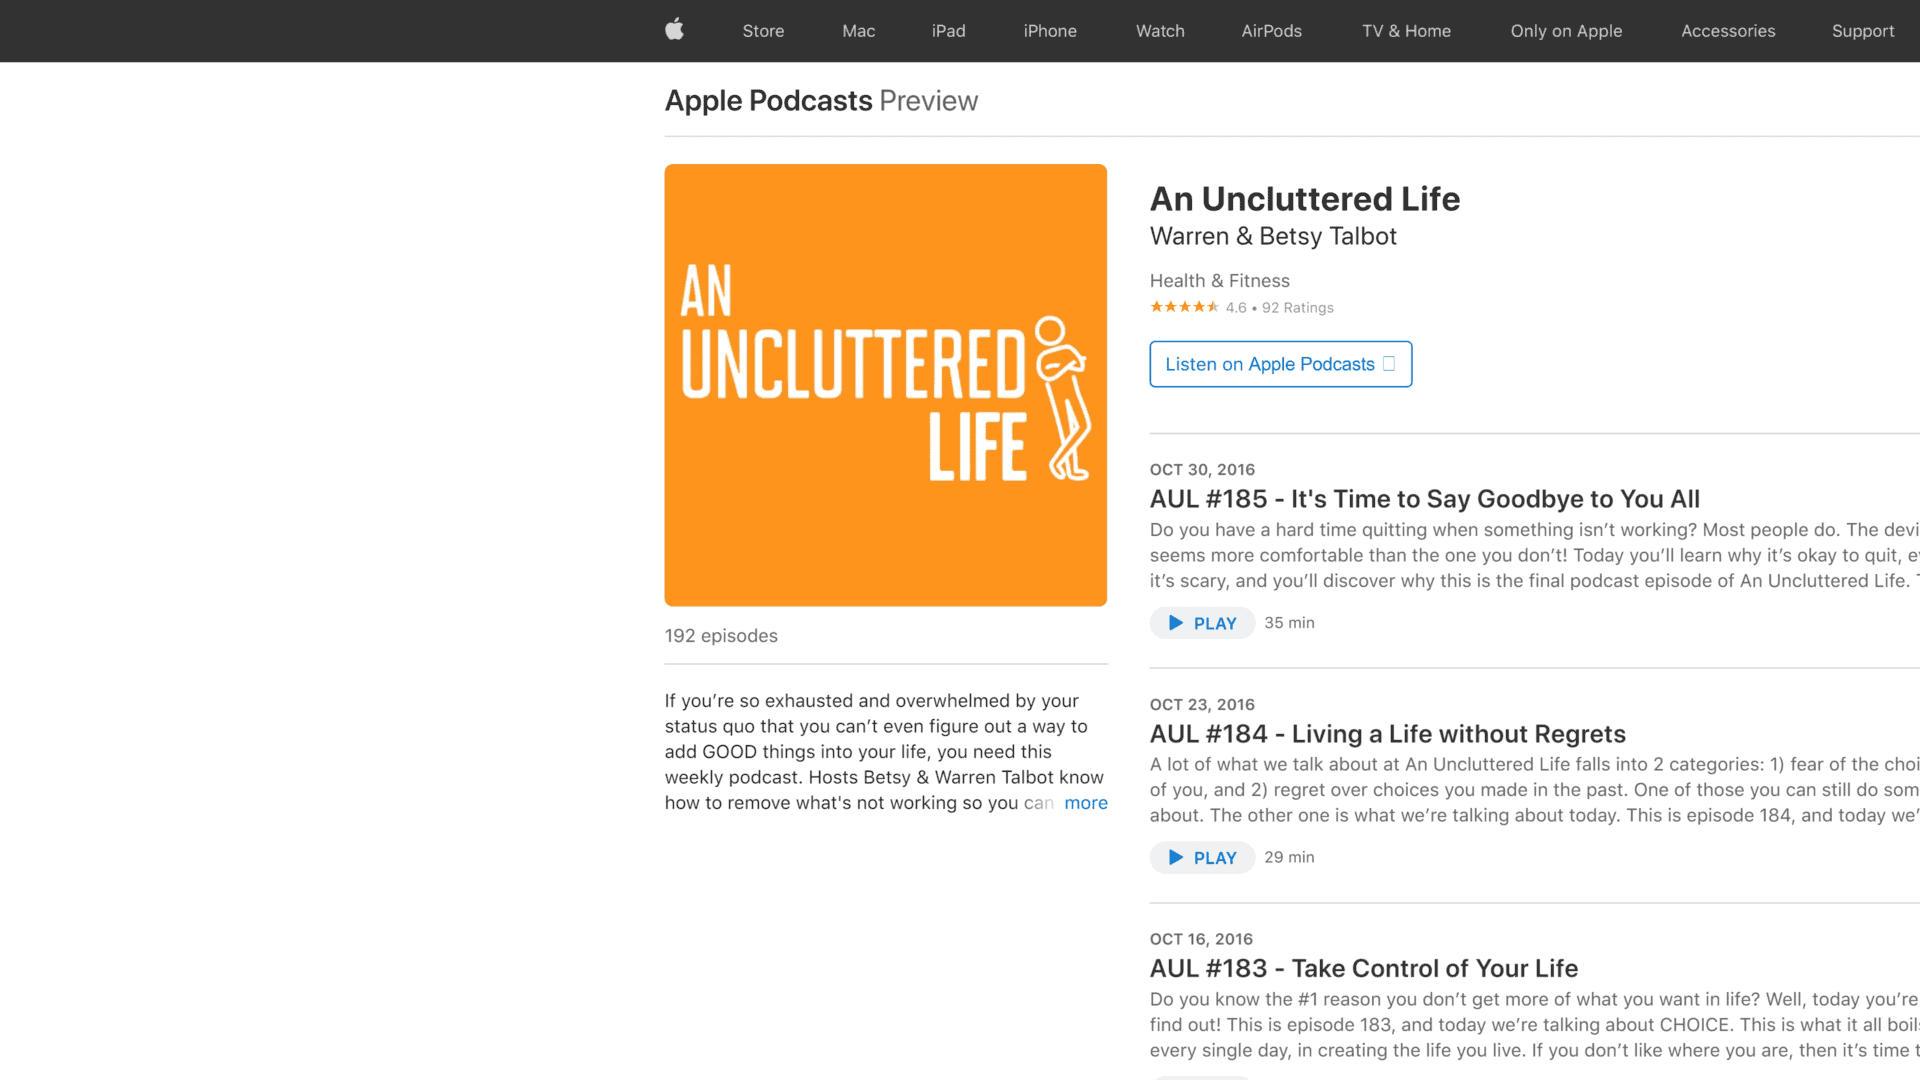 screenshot of the an uncluttered life podcast homepage